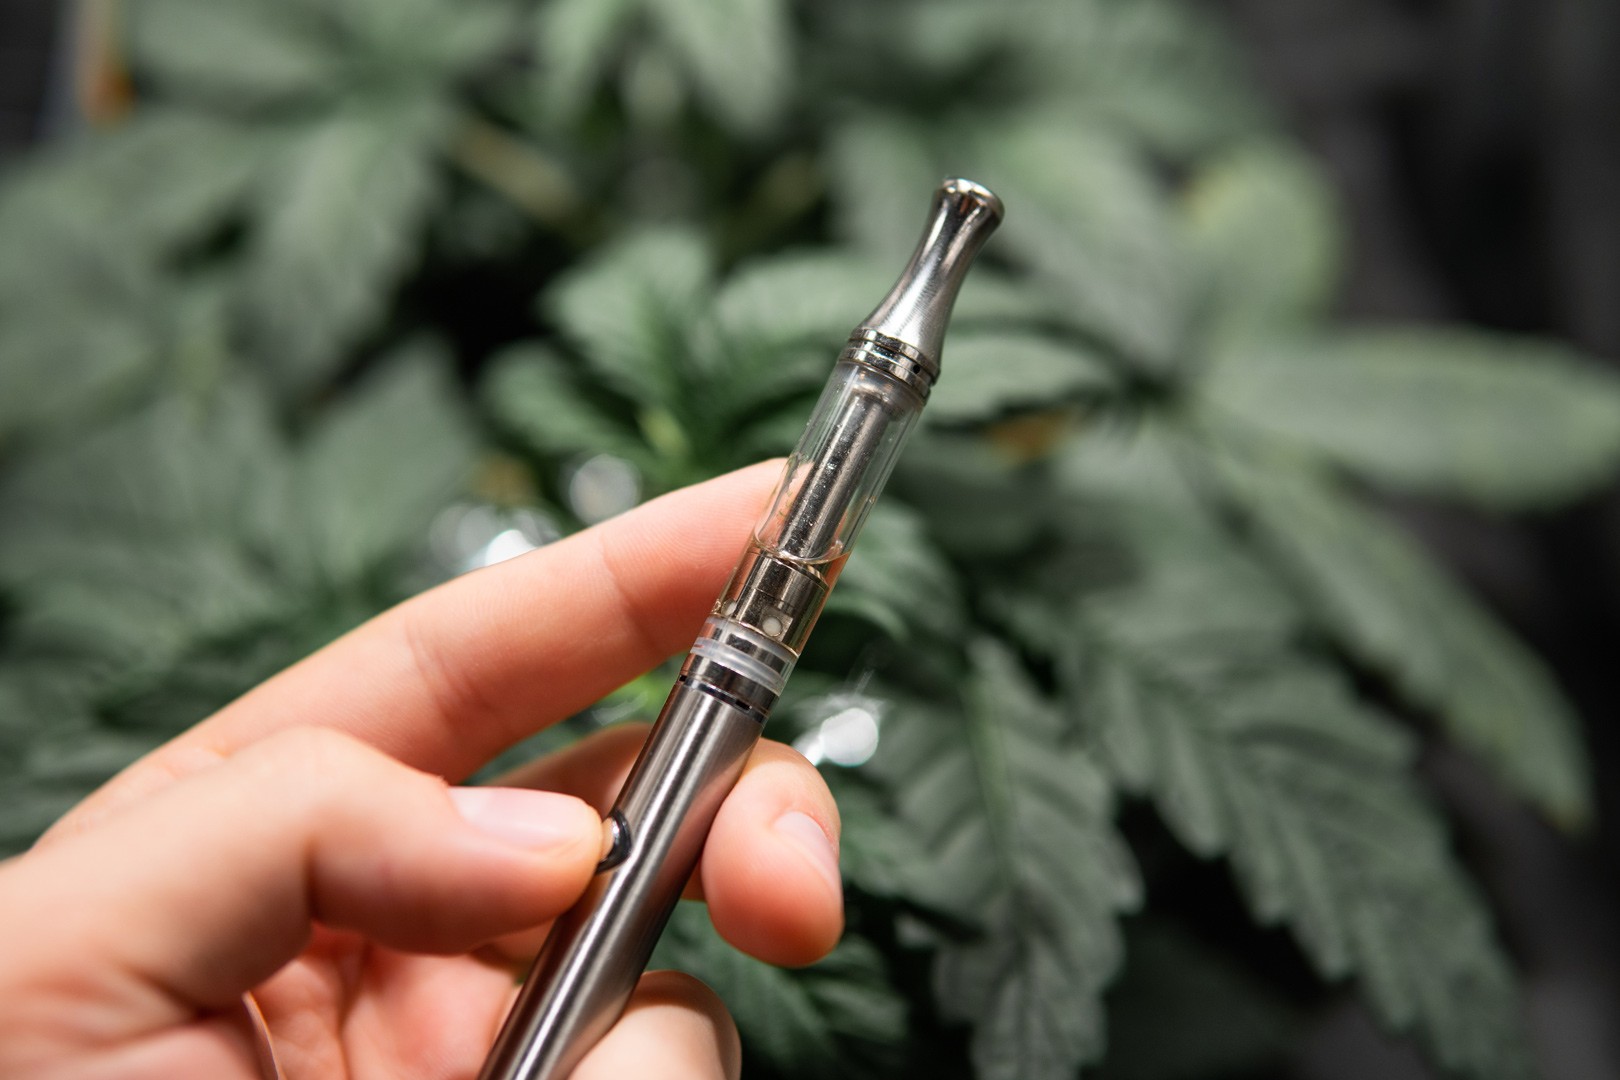 How Many Hits Are in a 1 Gram Vape Cartridge